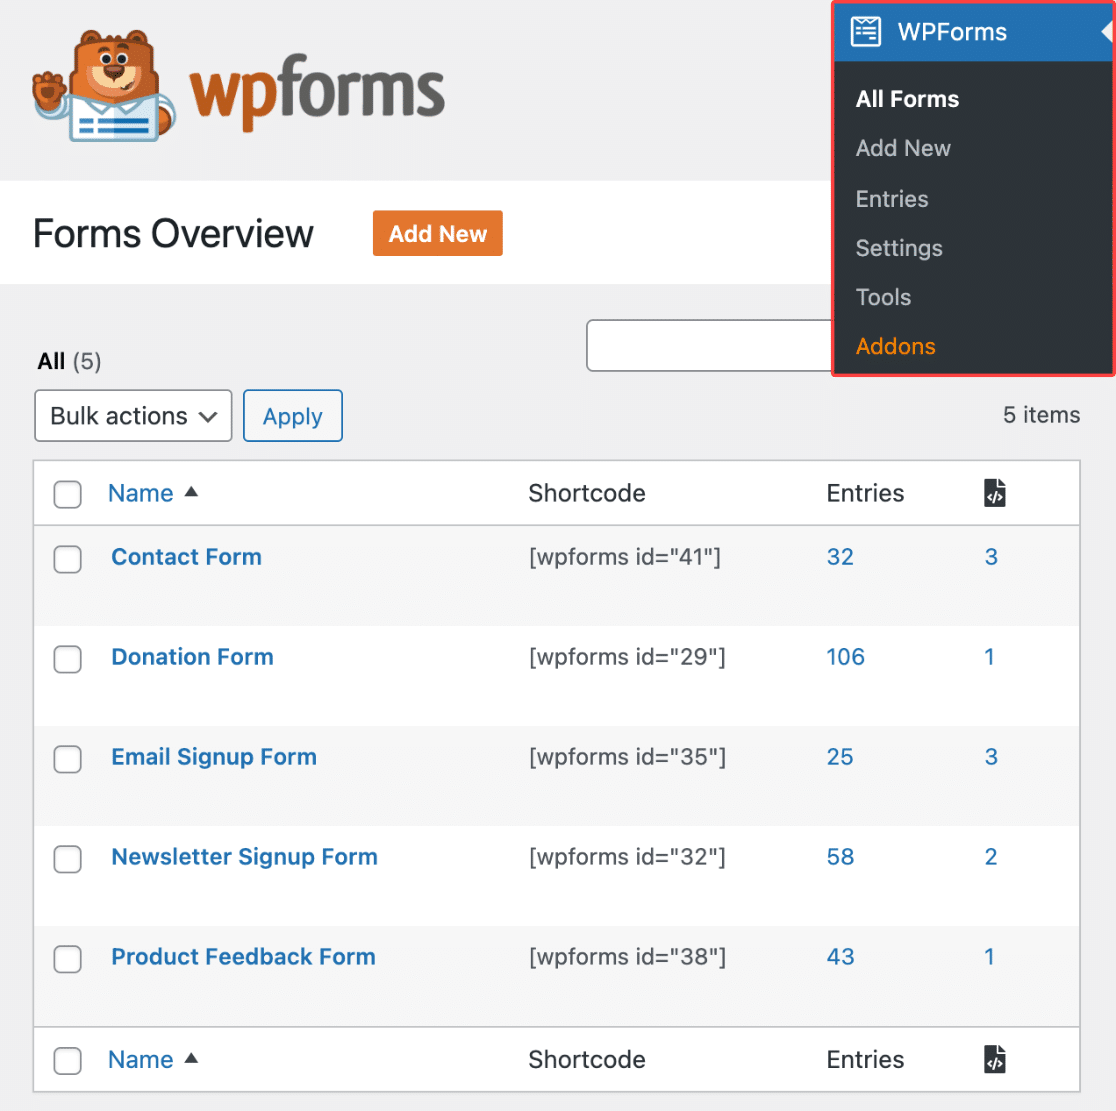 The WPForms Forms overview page